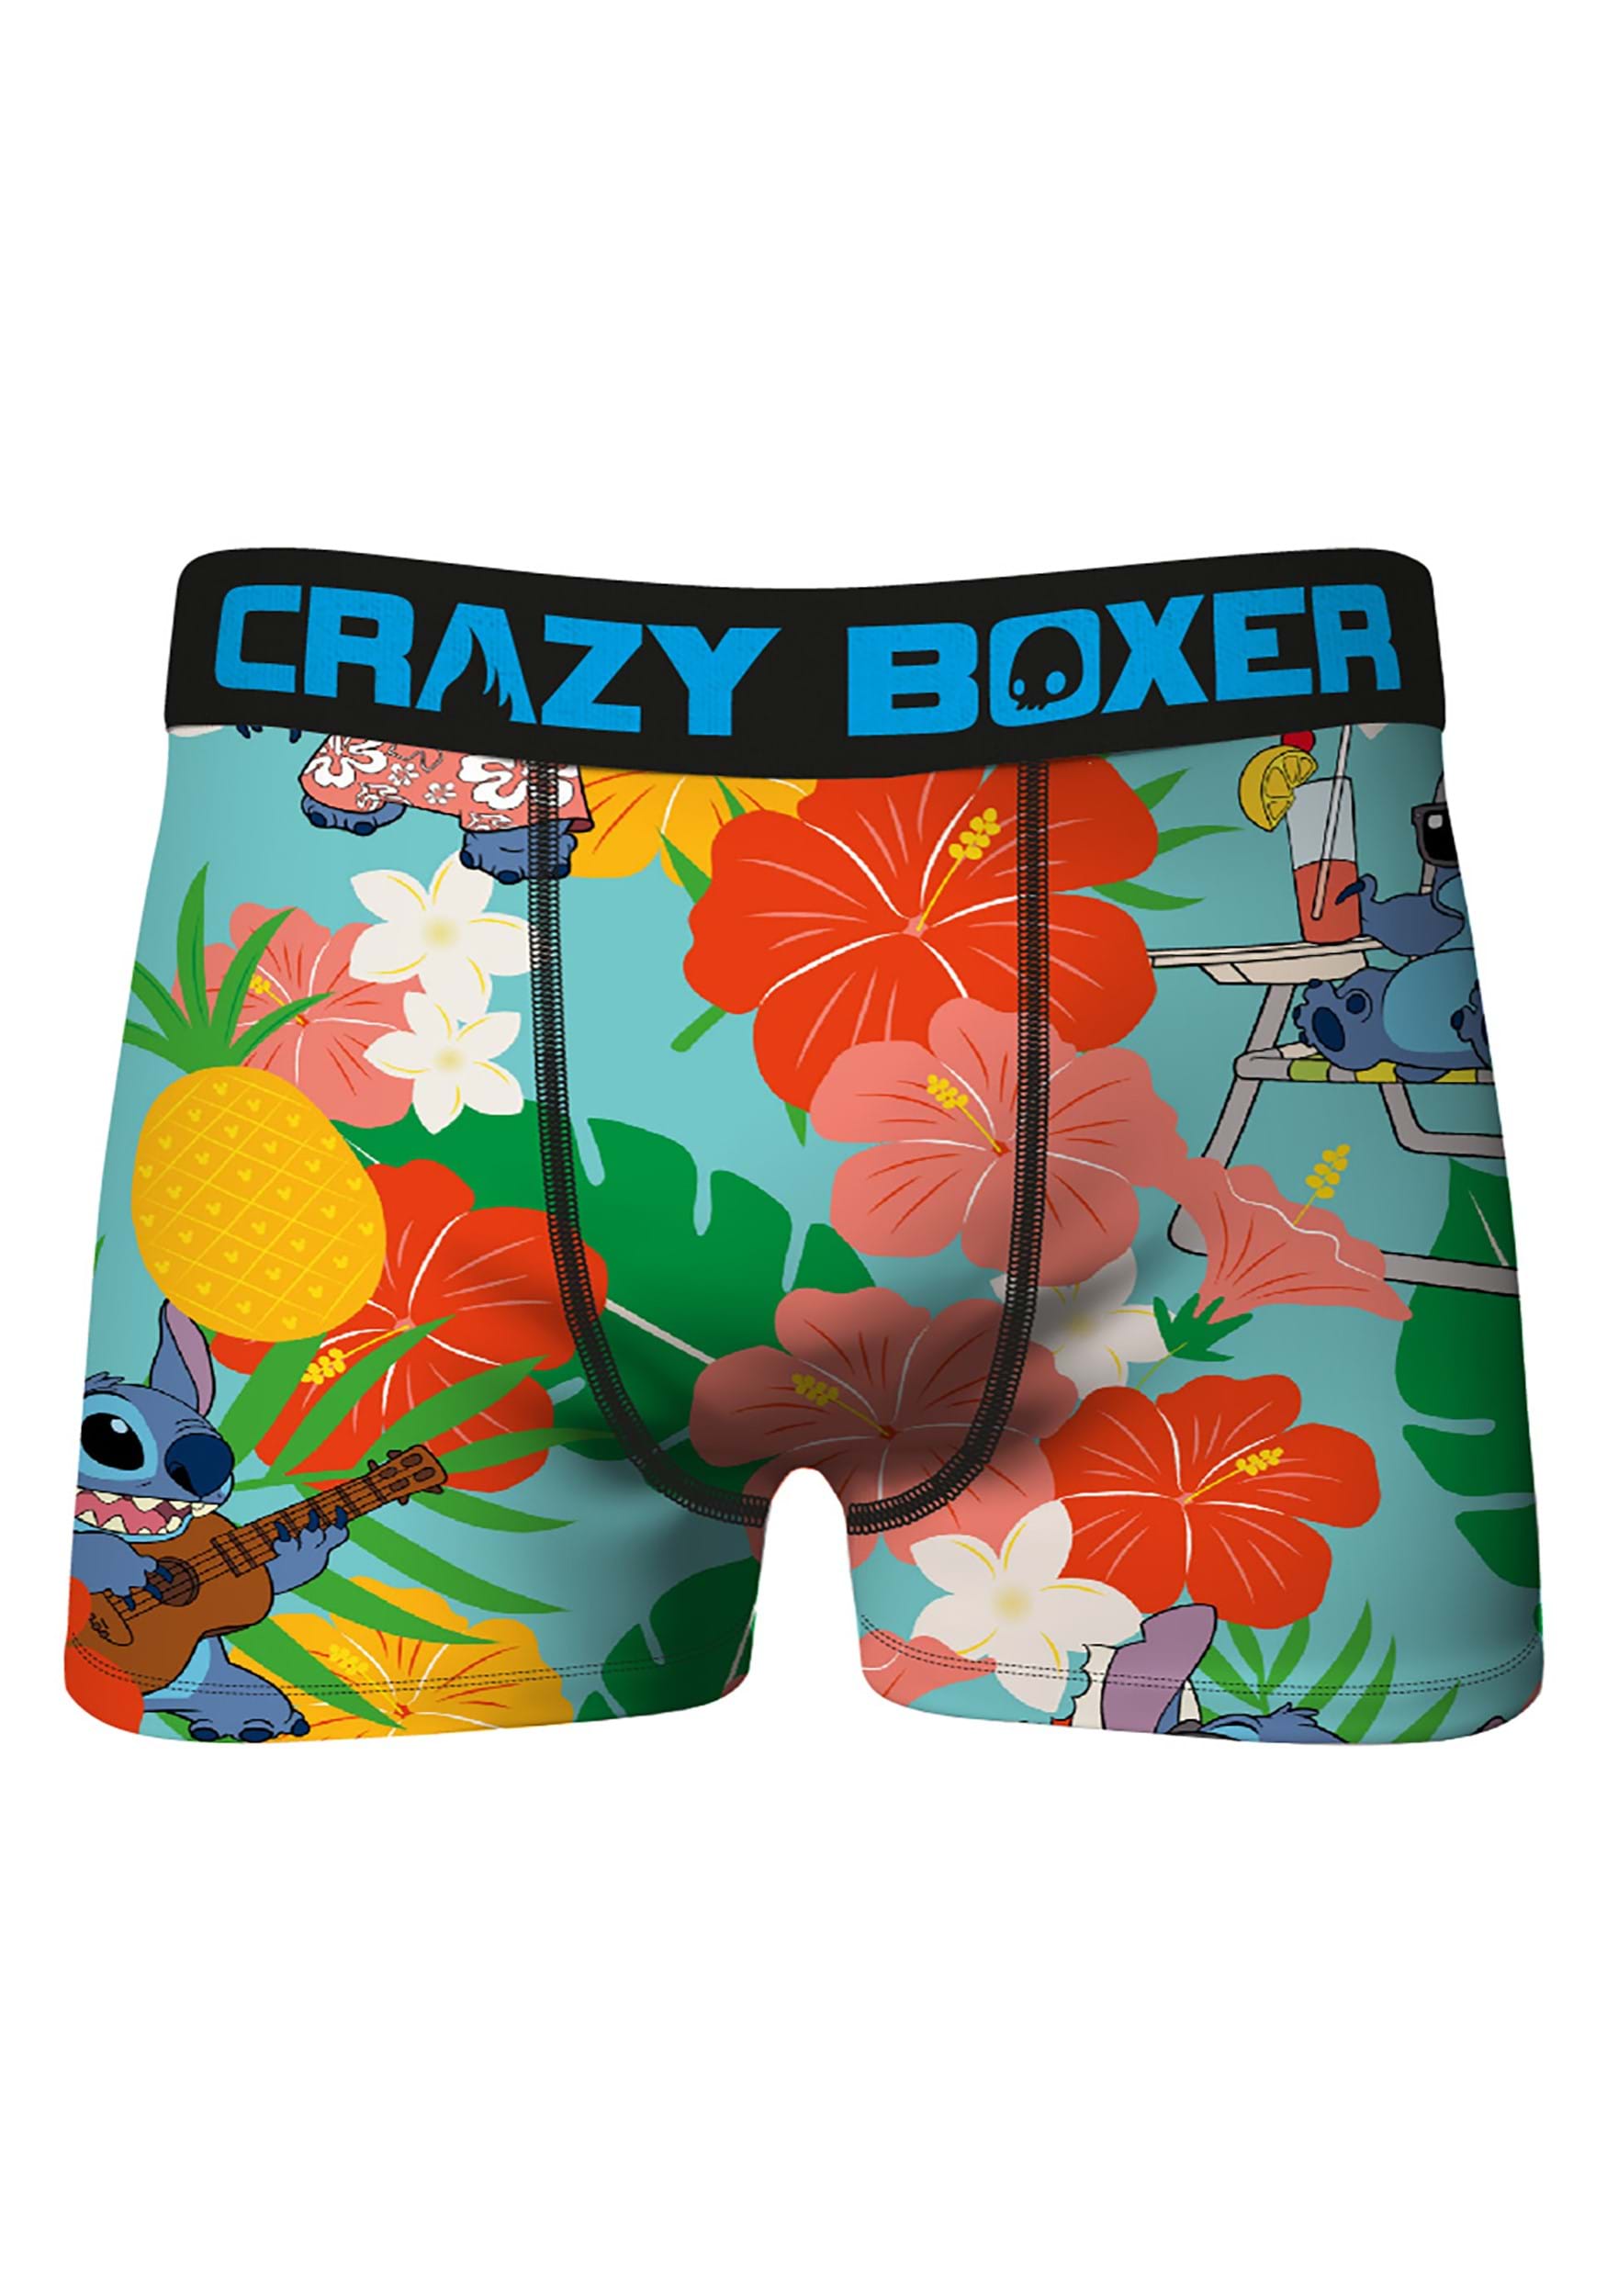 CRAZY BOXER BRIEF Tropical Hawaiian Red Lily Pattern Men's Size Medium New